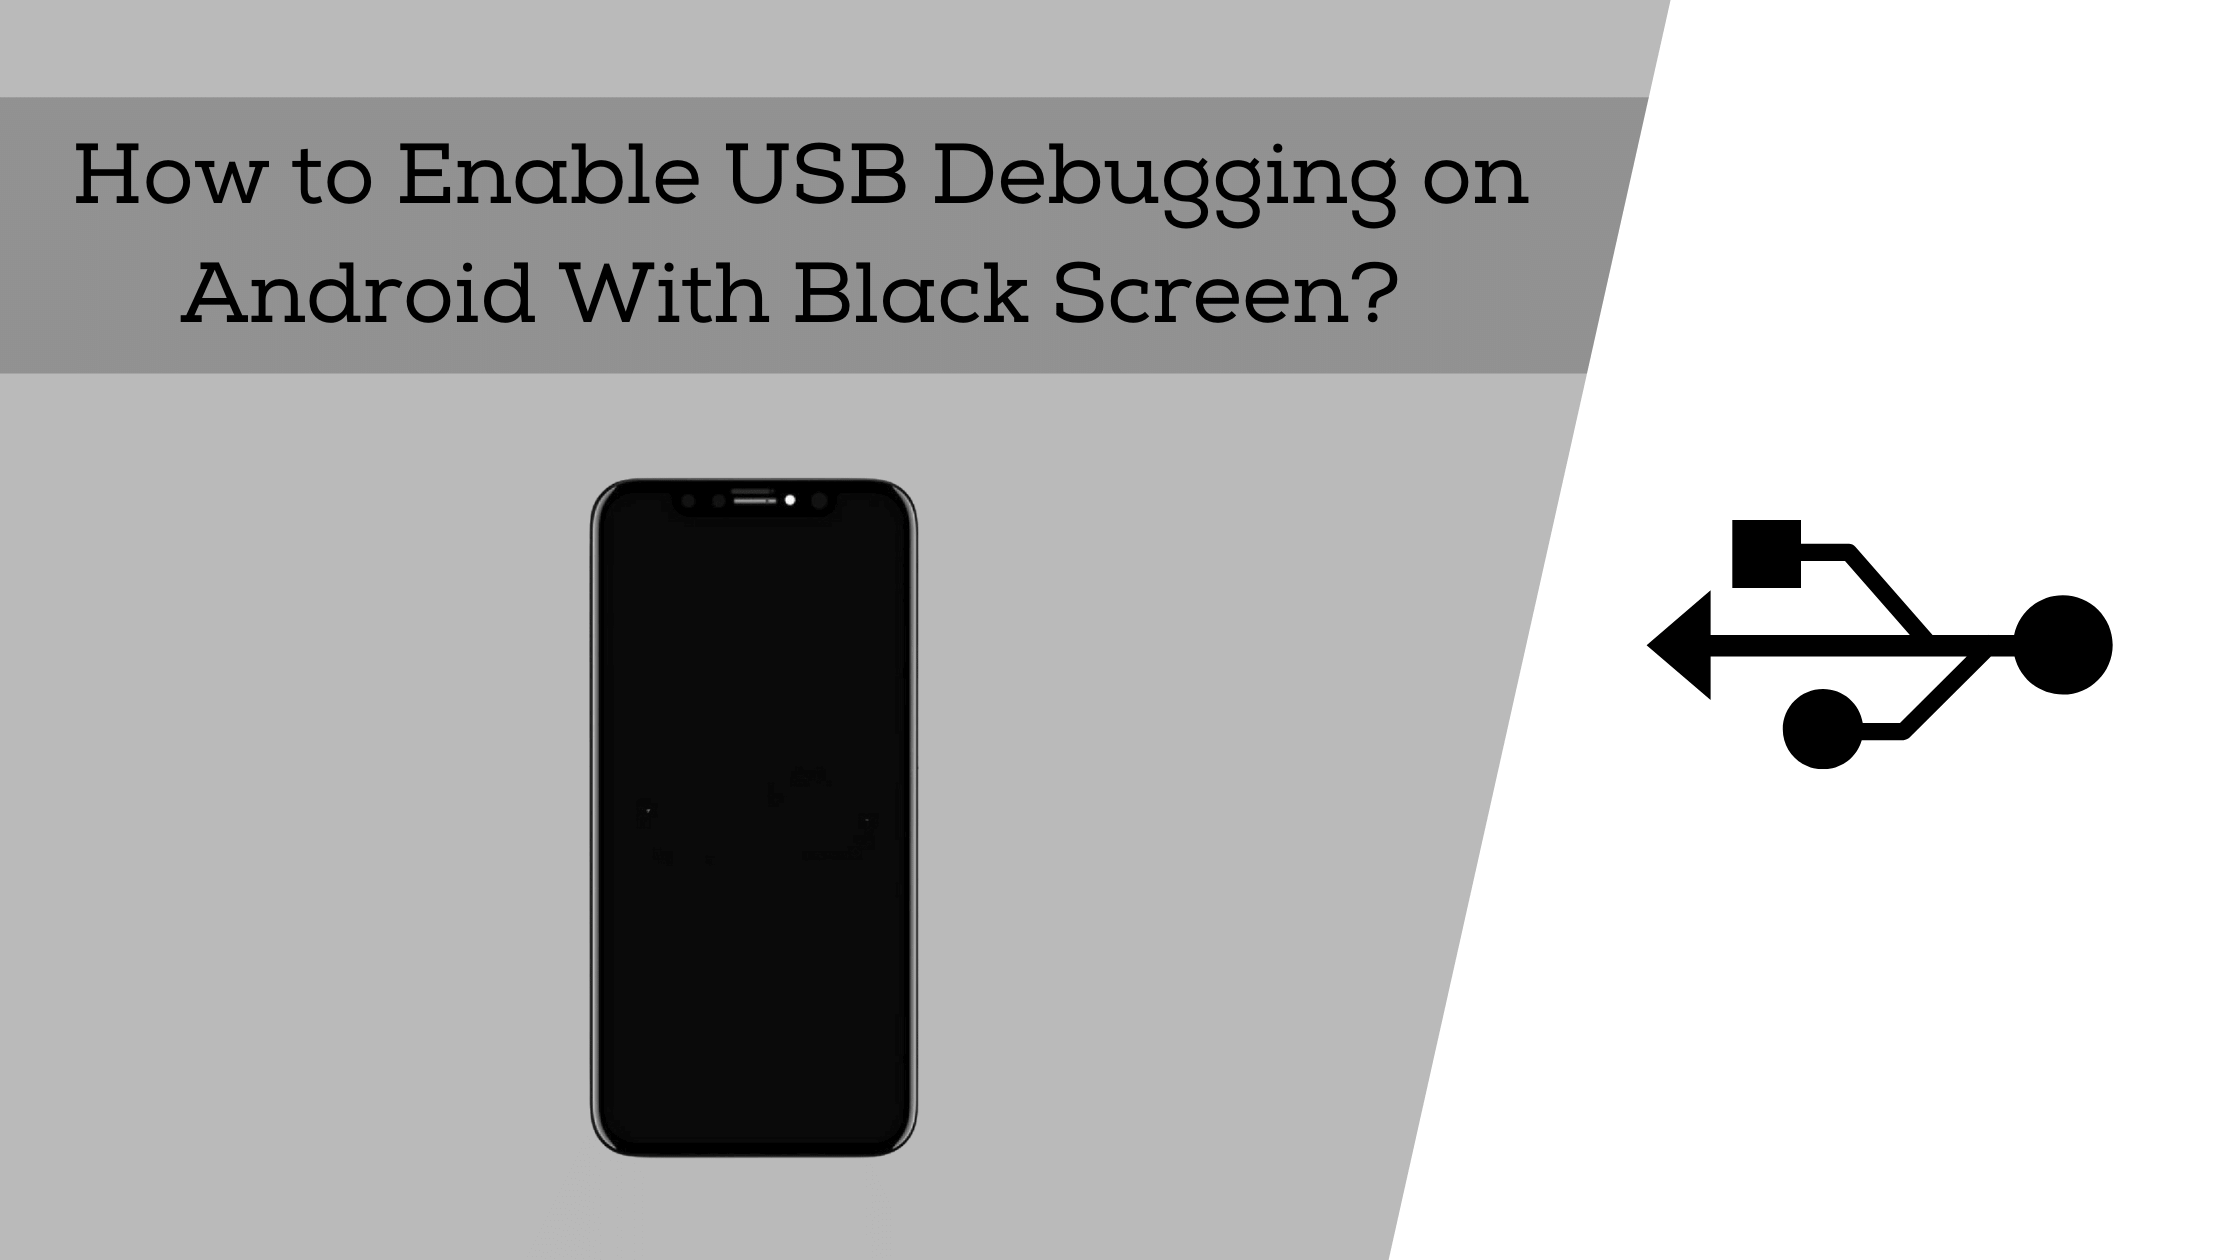 how to enable usb debugging on android with black screen?